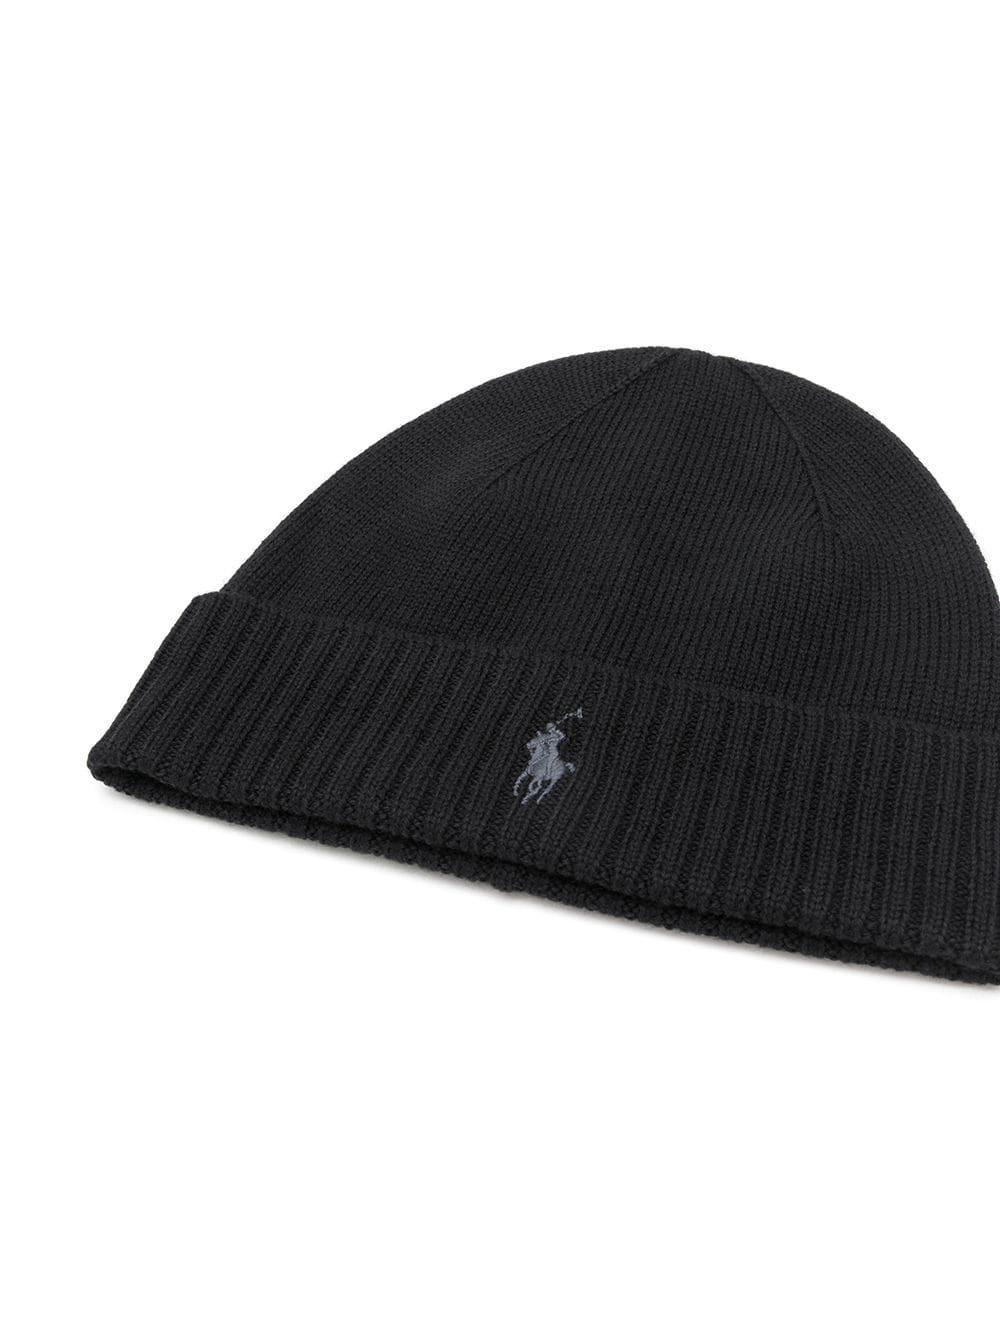 Polo Ralph Lauren Embroidered Logo Wool Beanie in Black for Men - Lyst